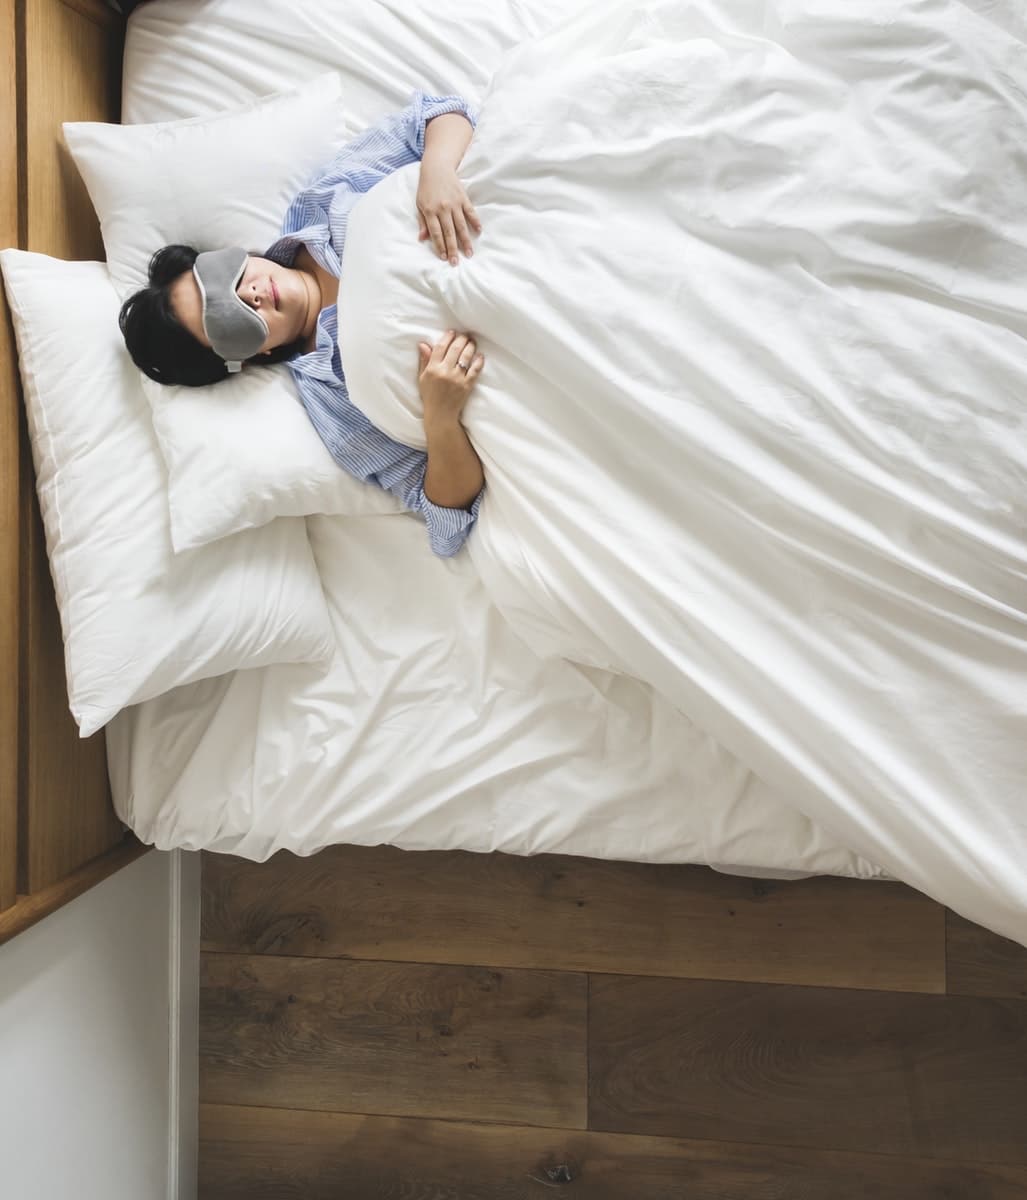 Why sleeping on a bad mattress can lead to back pain